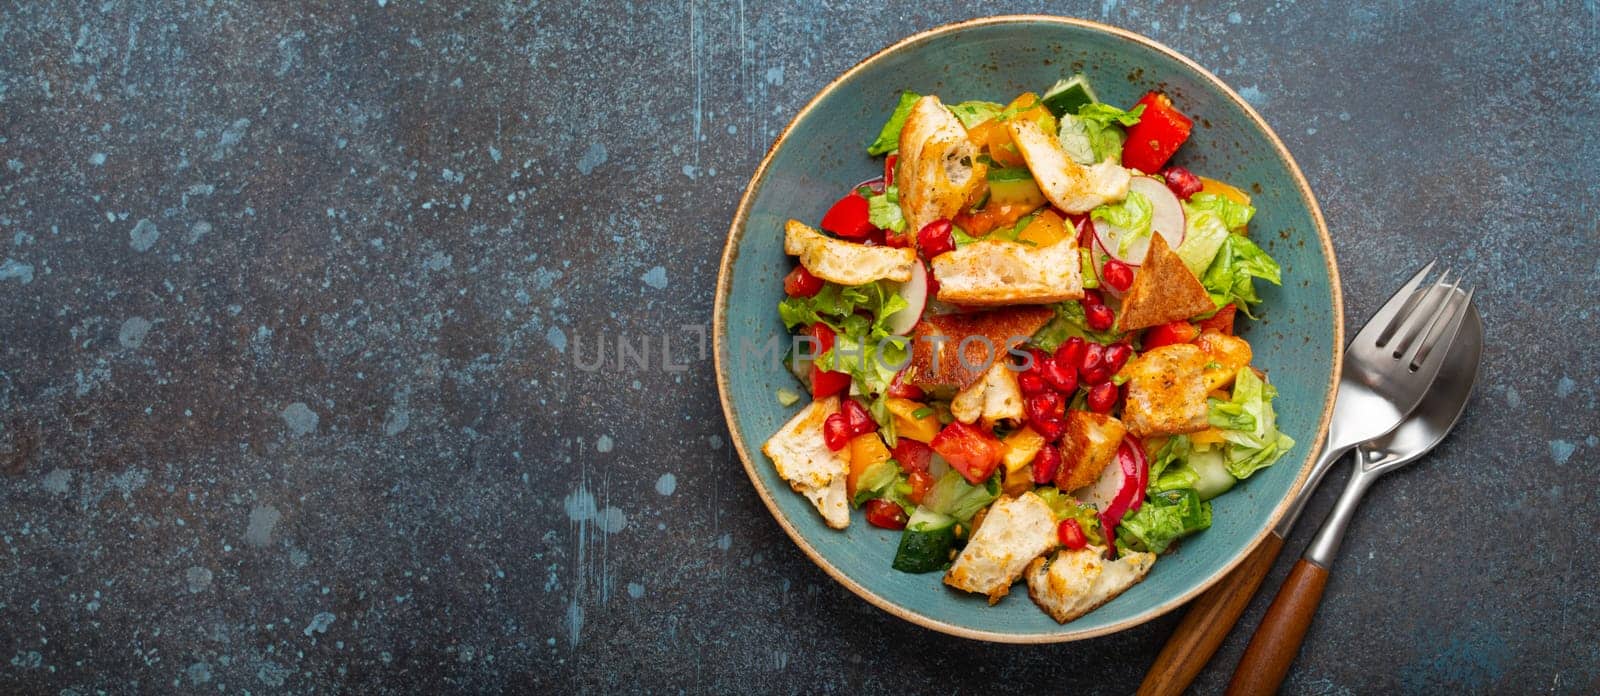 Traditional Levant dish Fattoush salad, Arab cuisine, made with pita bread croutons, vegetables and herbs. Healthy Middle Eastern vegetarian salad on plate, rustic dark blue background top view.